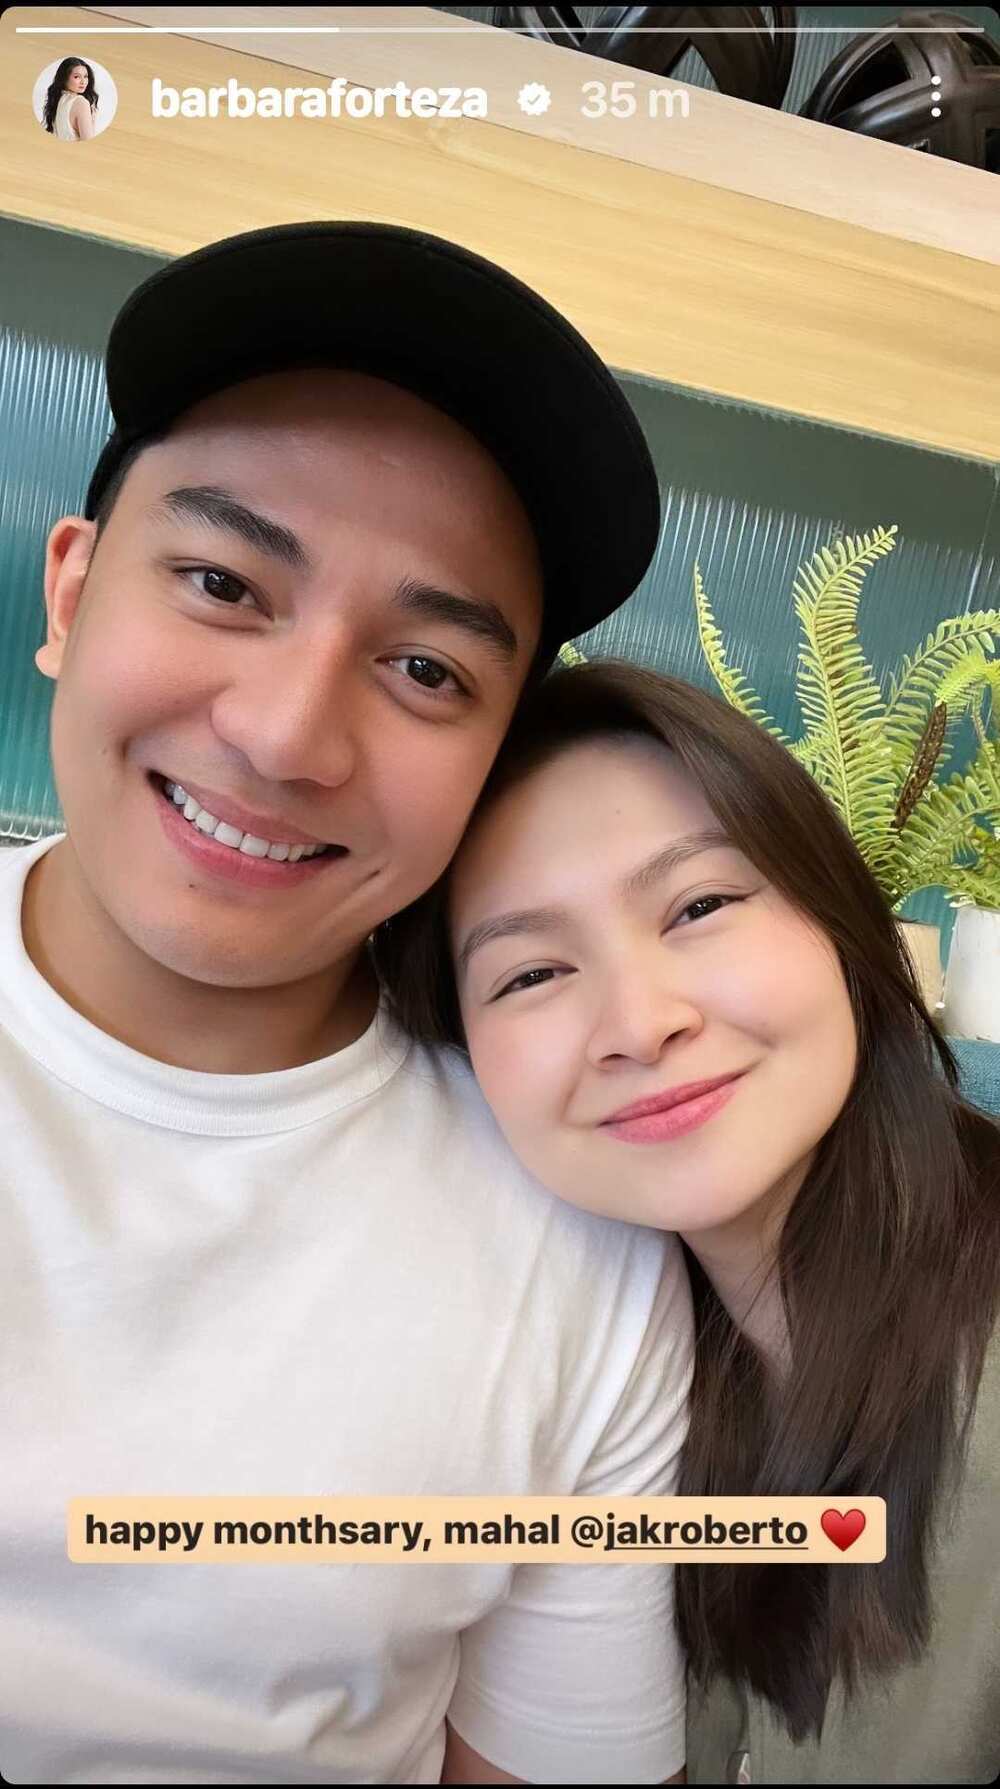 Barbie Forteza shares sweet post for Jak Roberto on their monthsary